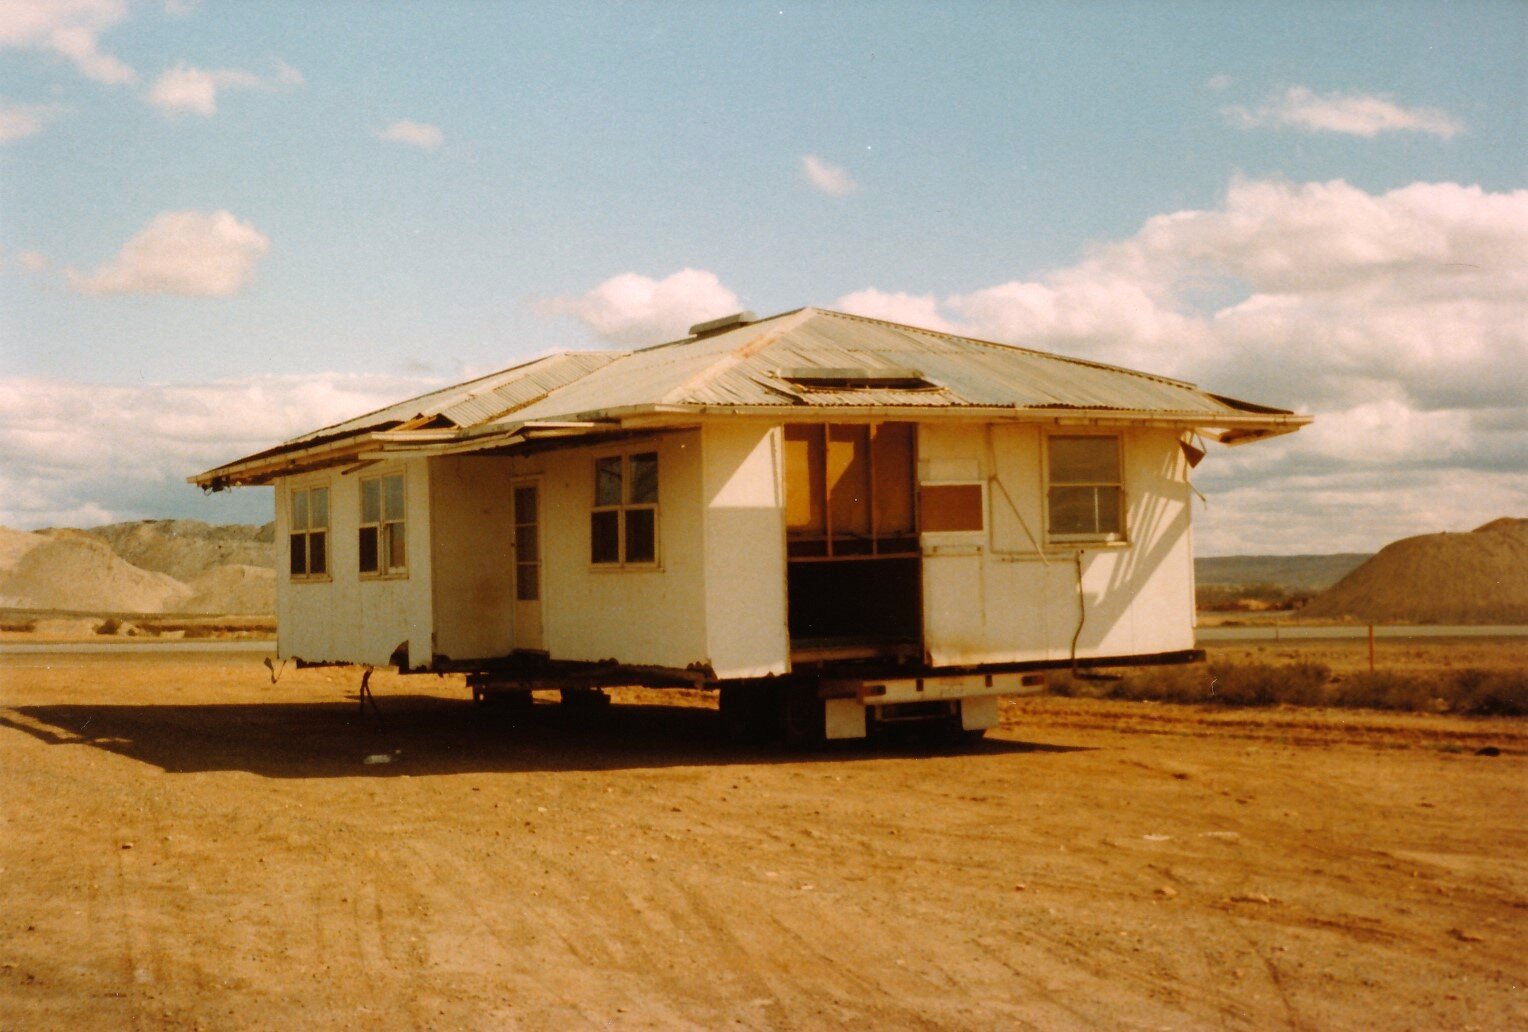  Destination unknown - September 1982 One of many transportable houses sold at auction ready for relocation to a new address. Enid Blieschke Collection 